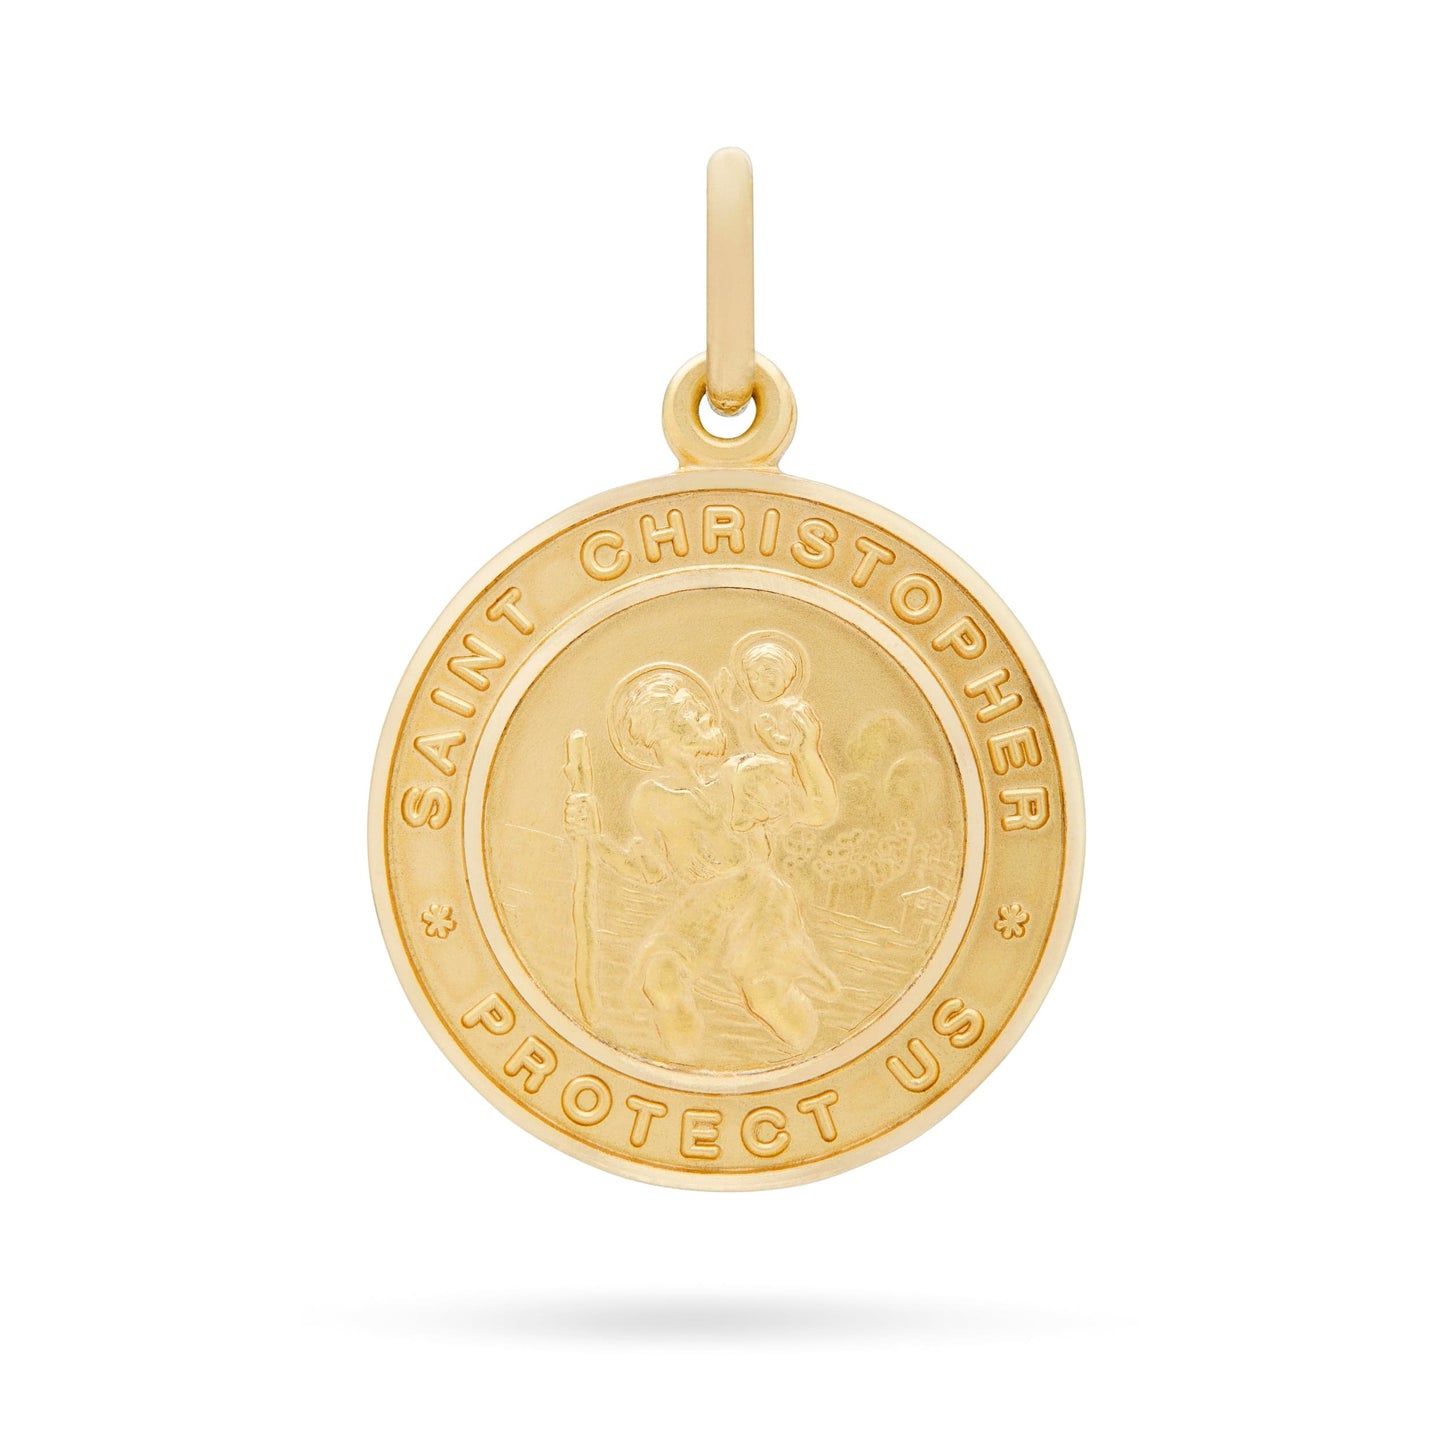 MONDO CATTOLICO Jewelry 19 mm (0.74 in) Gold medal of Saint Christopher